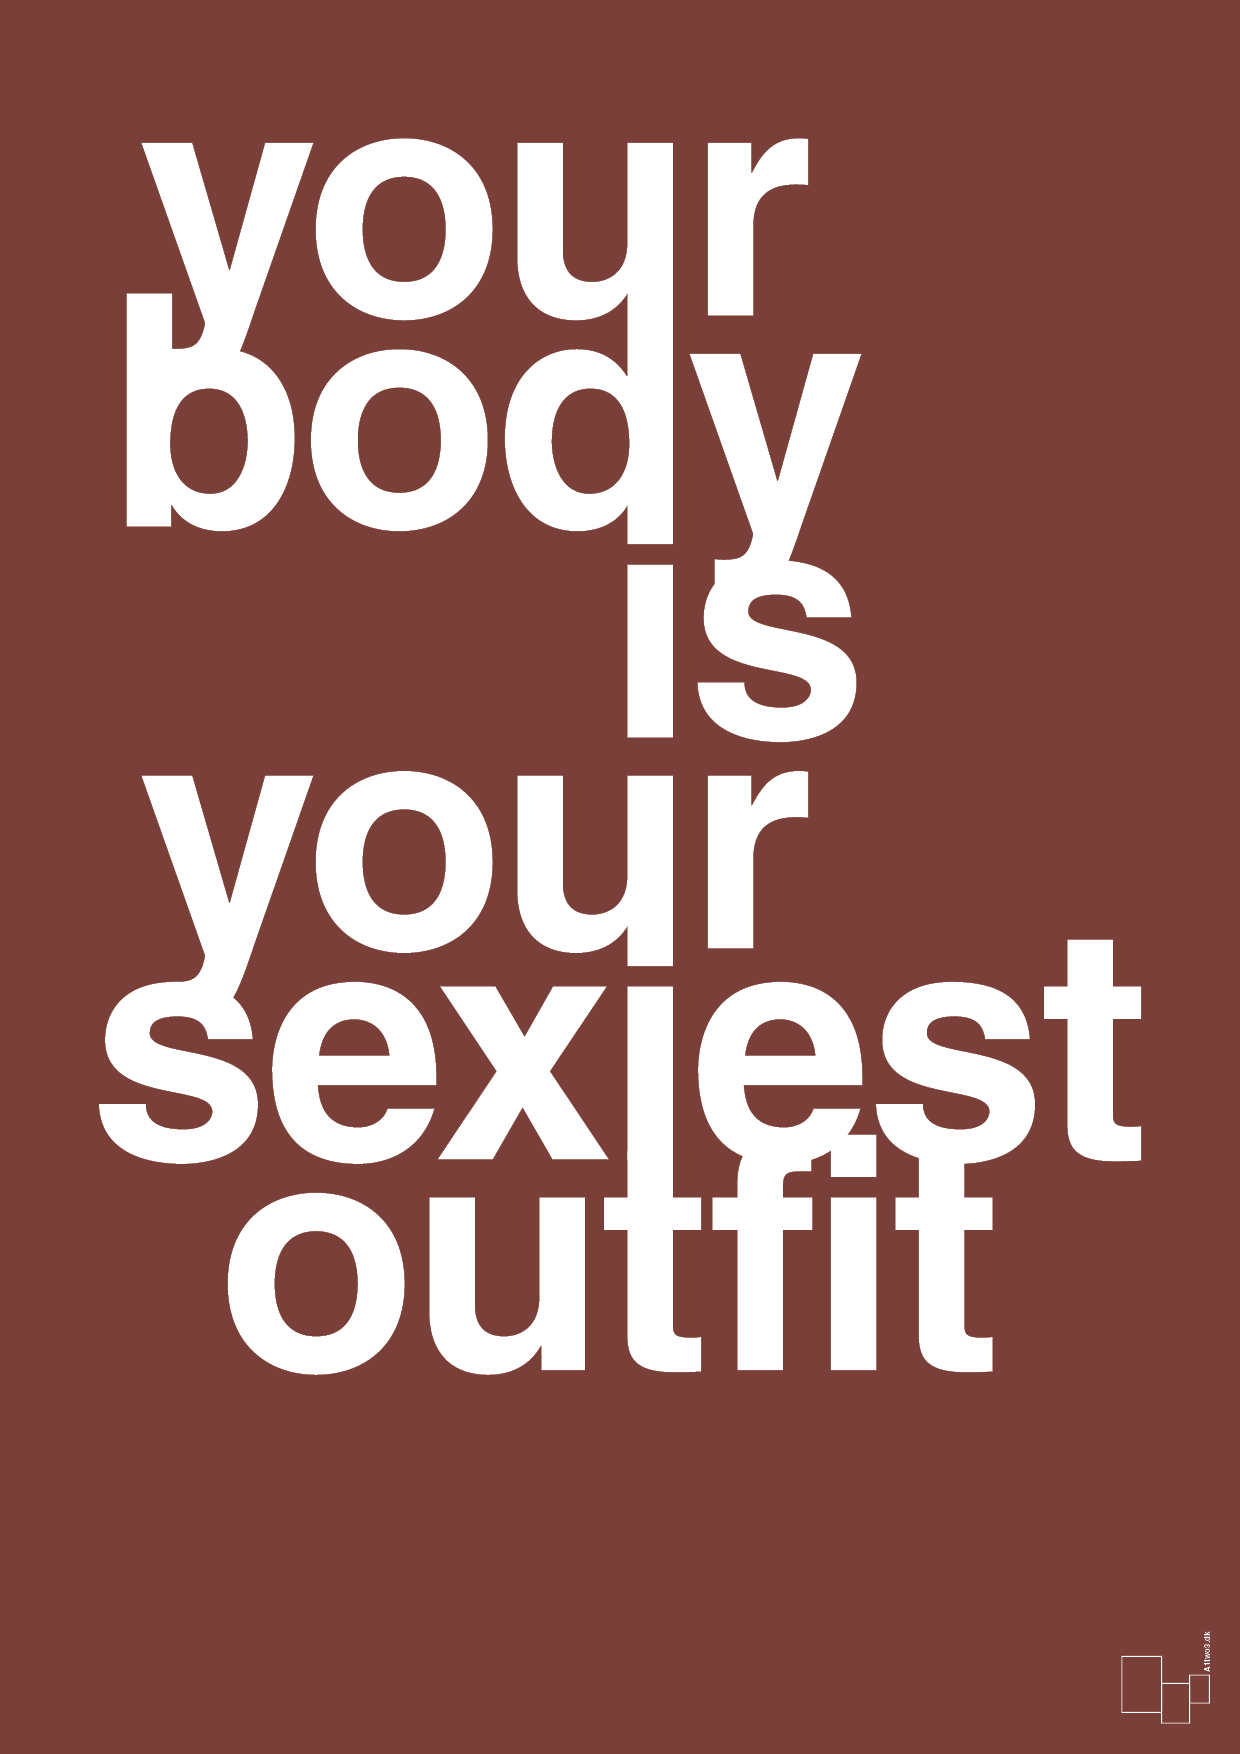 your body is your sexiest outfit - Plakat med Sport & Fritid i Red Pepper